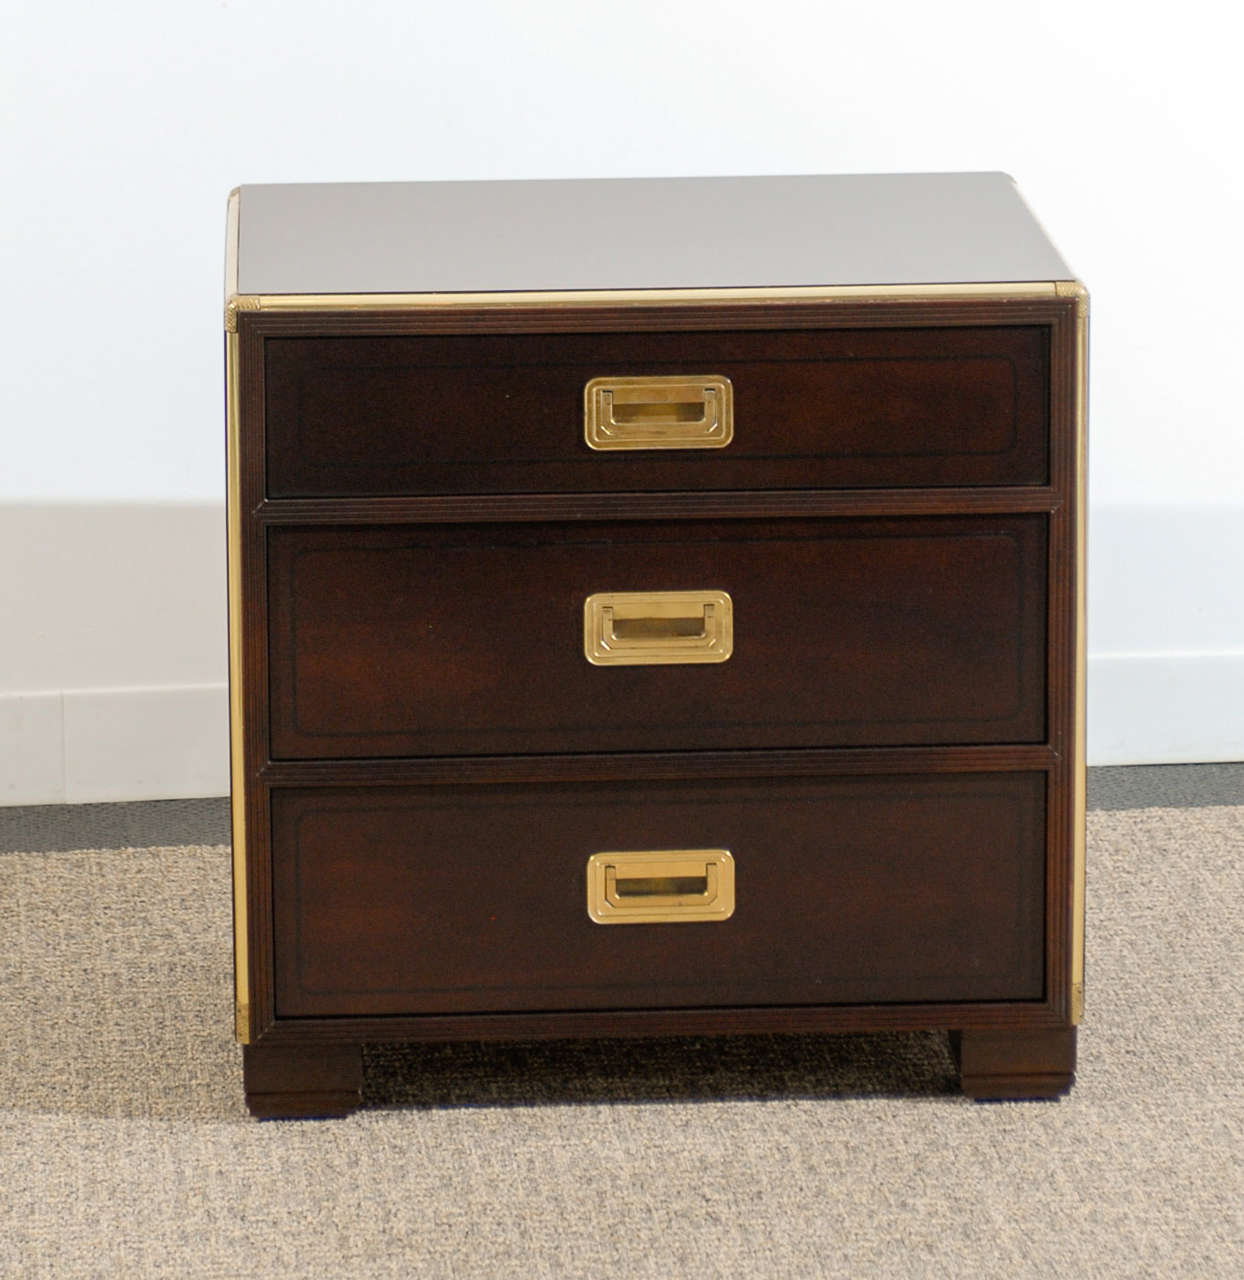 A beautiful and functional pair of three (3) drawer campaign chests by Baker,Circa 1970. Can be used as end tables or nightstands. Handsome solid brass detail. Restored in espresso lacquer. Retains the maker tag. Excellent Restored Condition. The